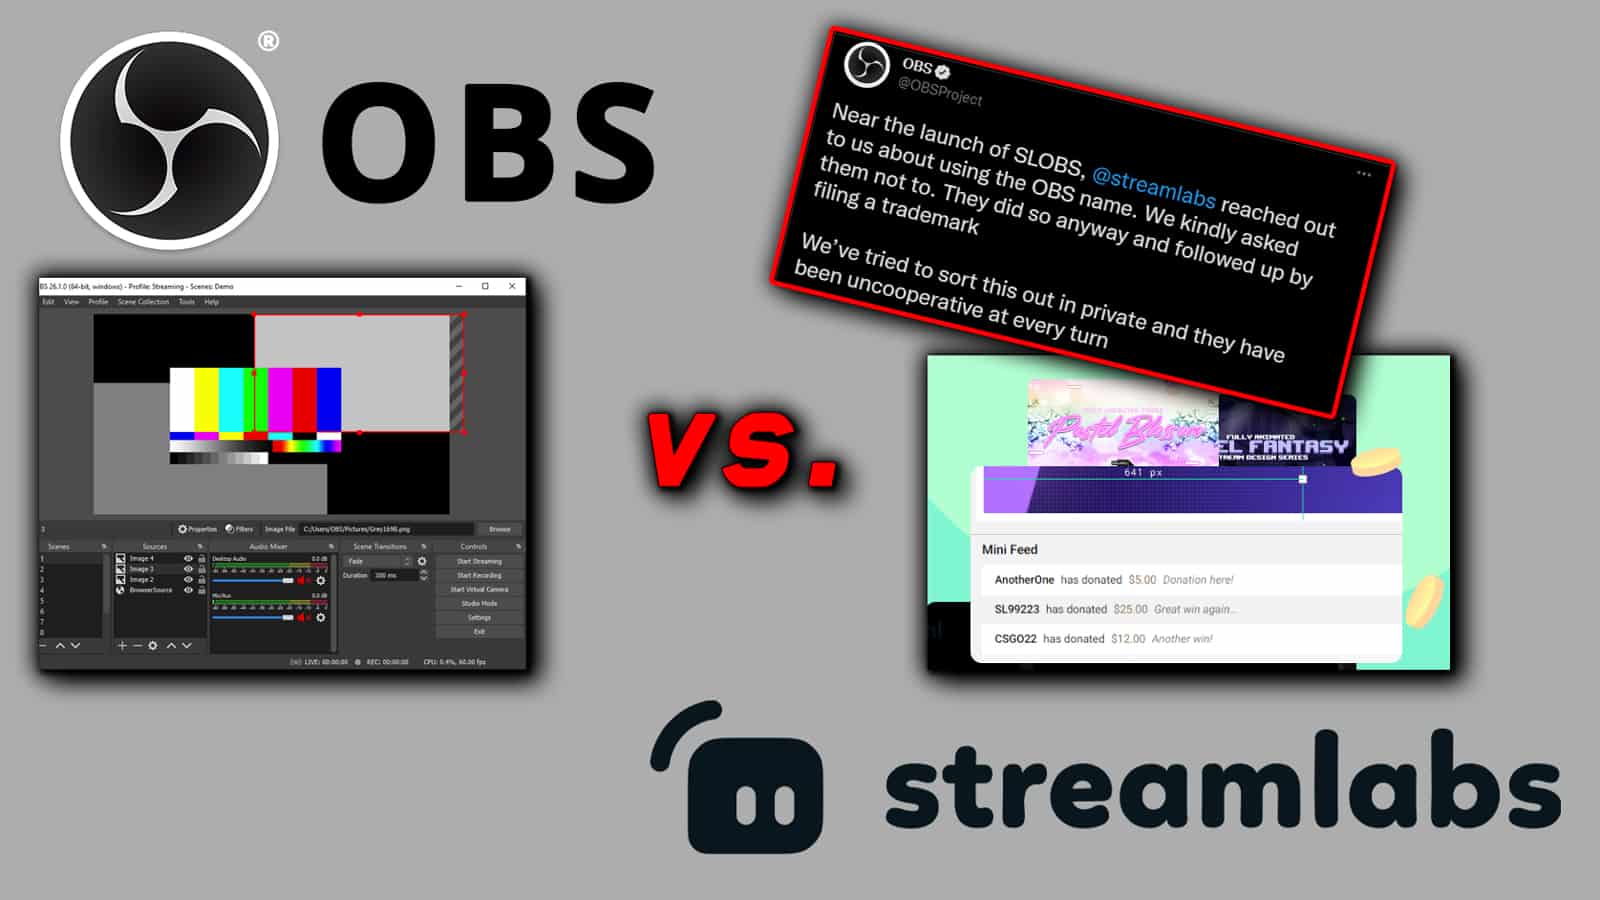 After the allegations: Streamlabs removes OBS from the name